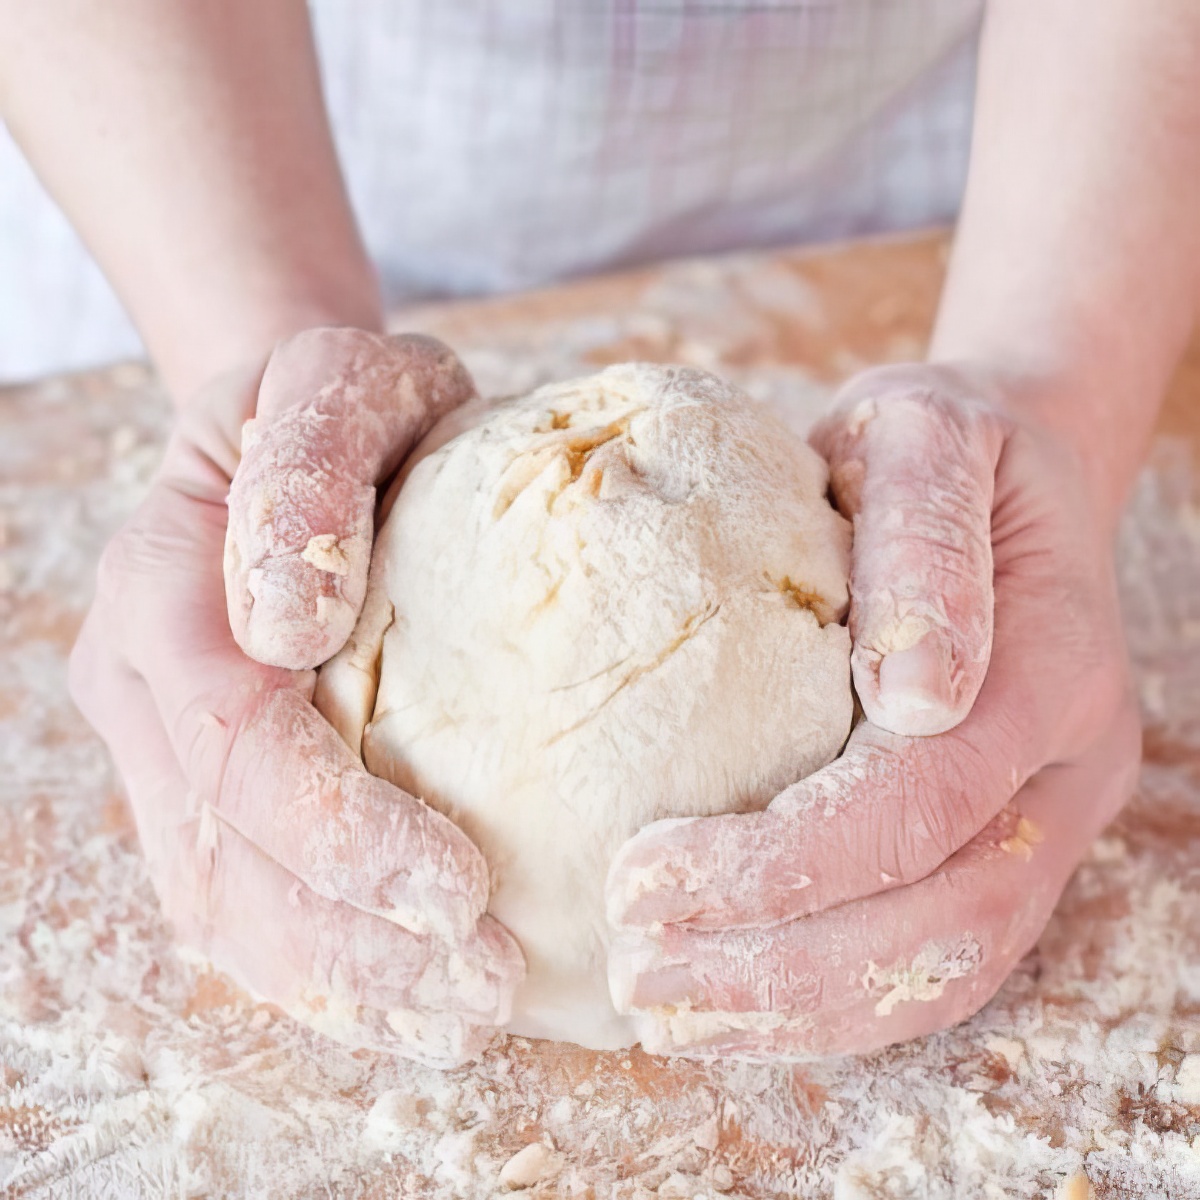 Making this amazing Bread with your kids at home!